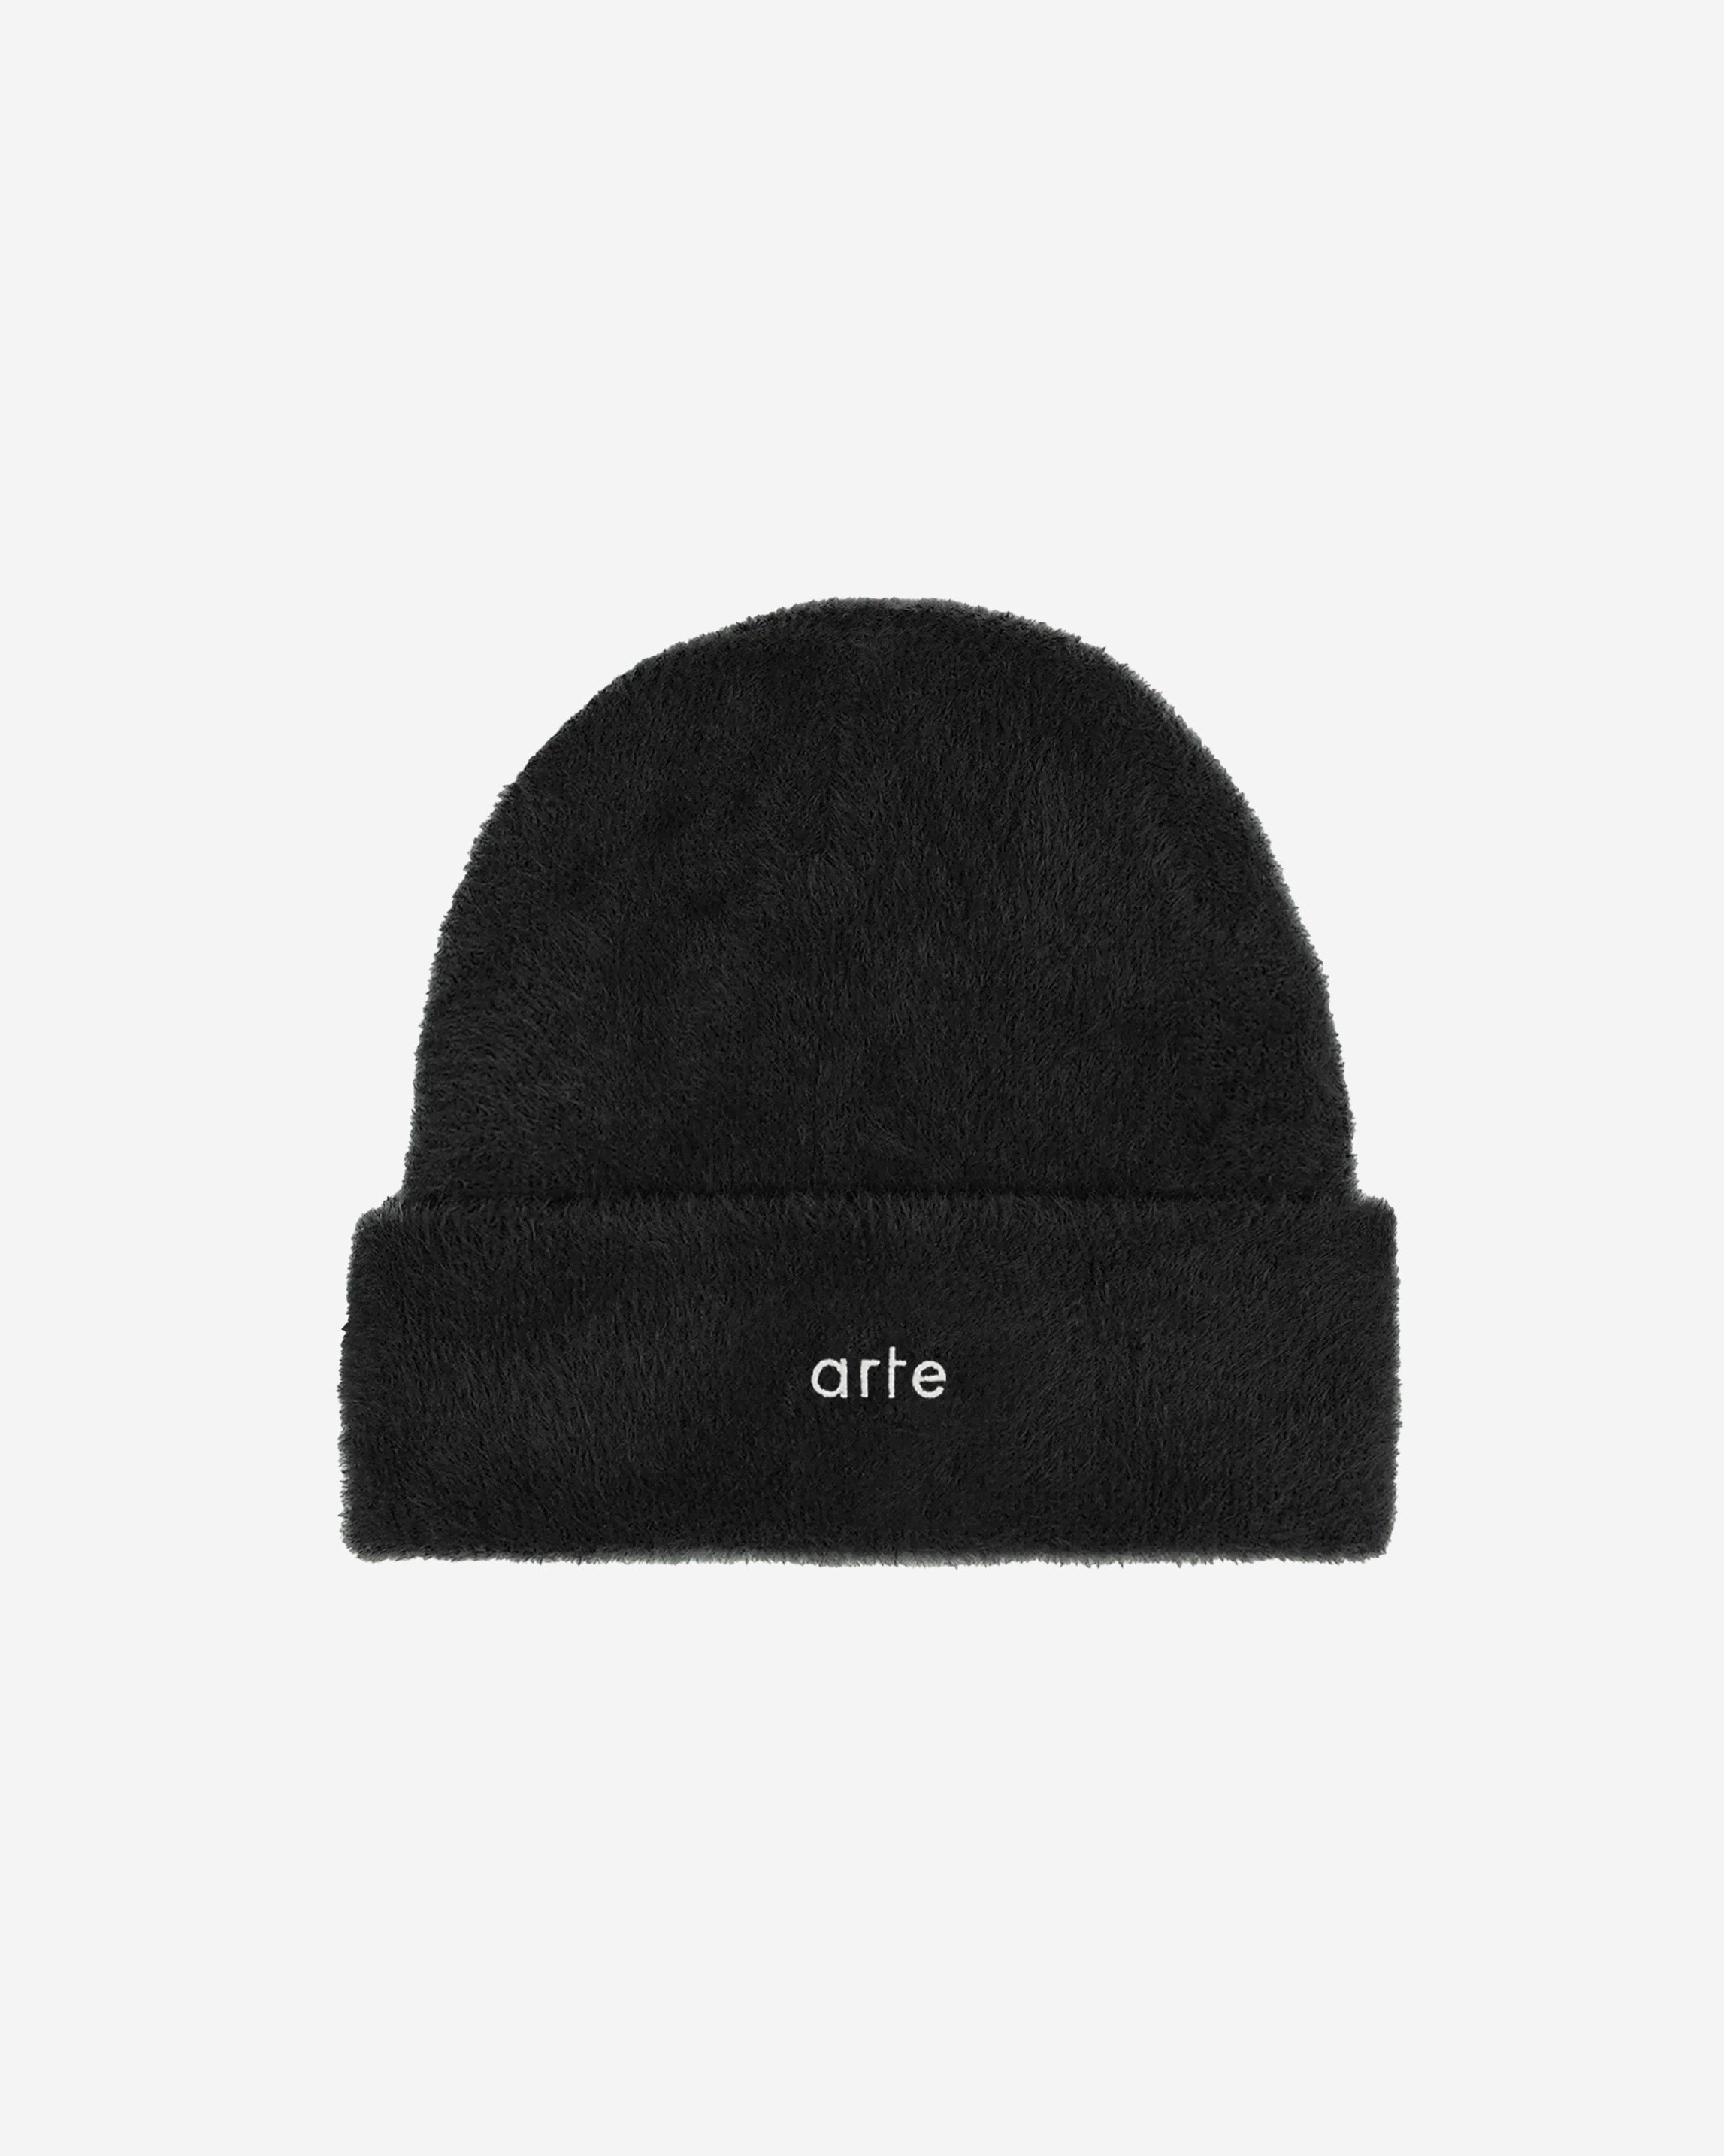 The Bennie Fluffy is designed to keep you warm during the coldest seasons. Bennie Beanie comes in a black colorway with a tonal embroidery on the front. The beanie has a fluffy look that gives a soft feeling.